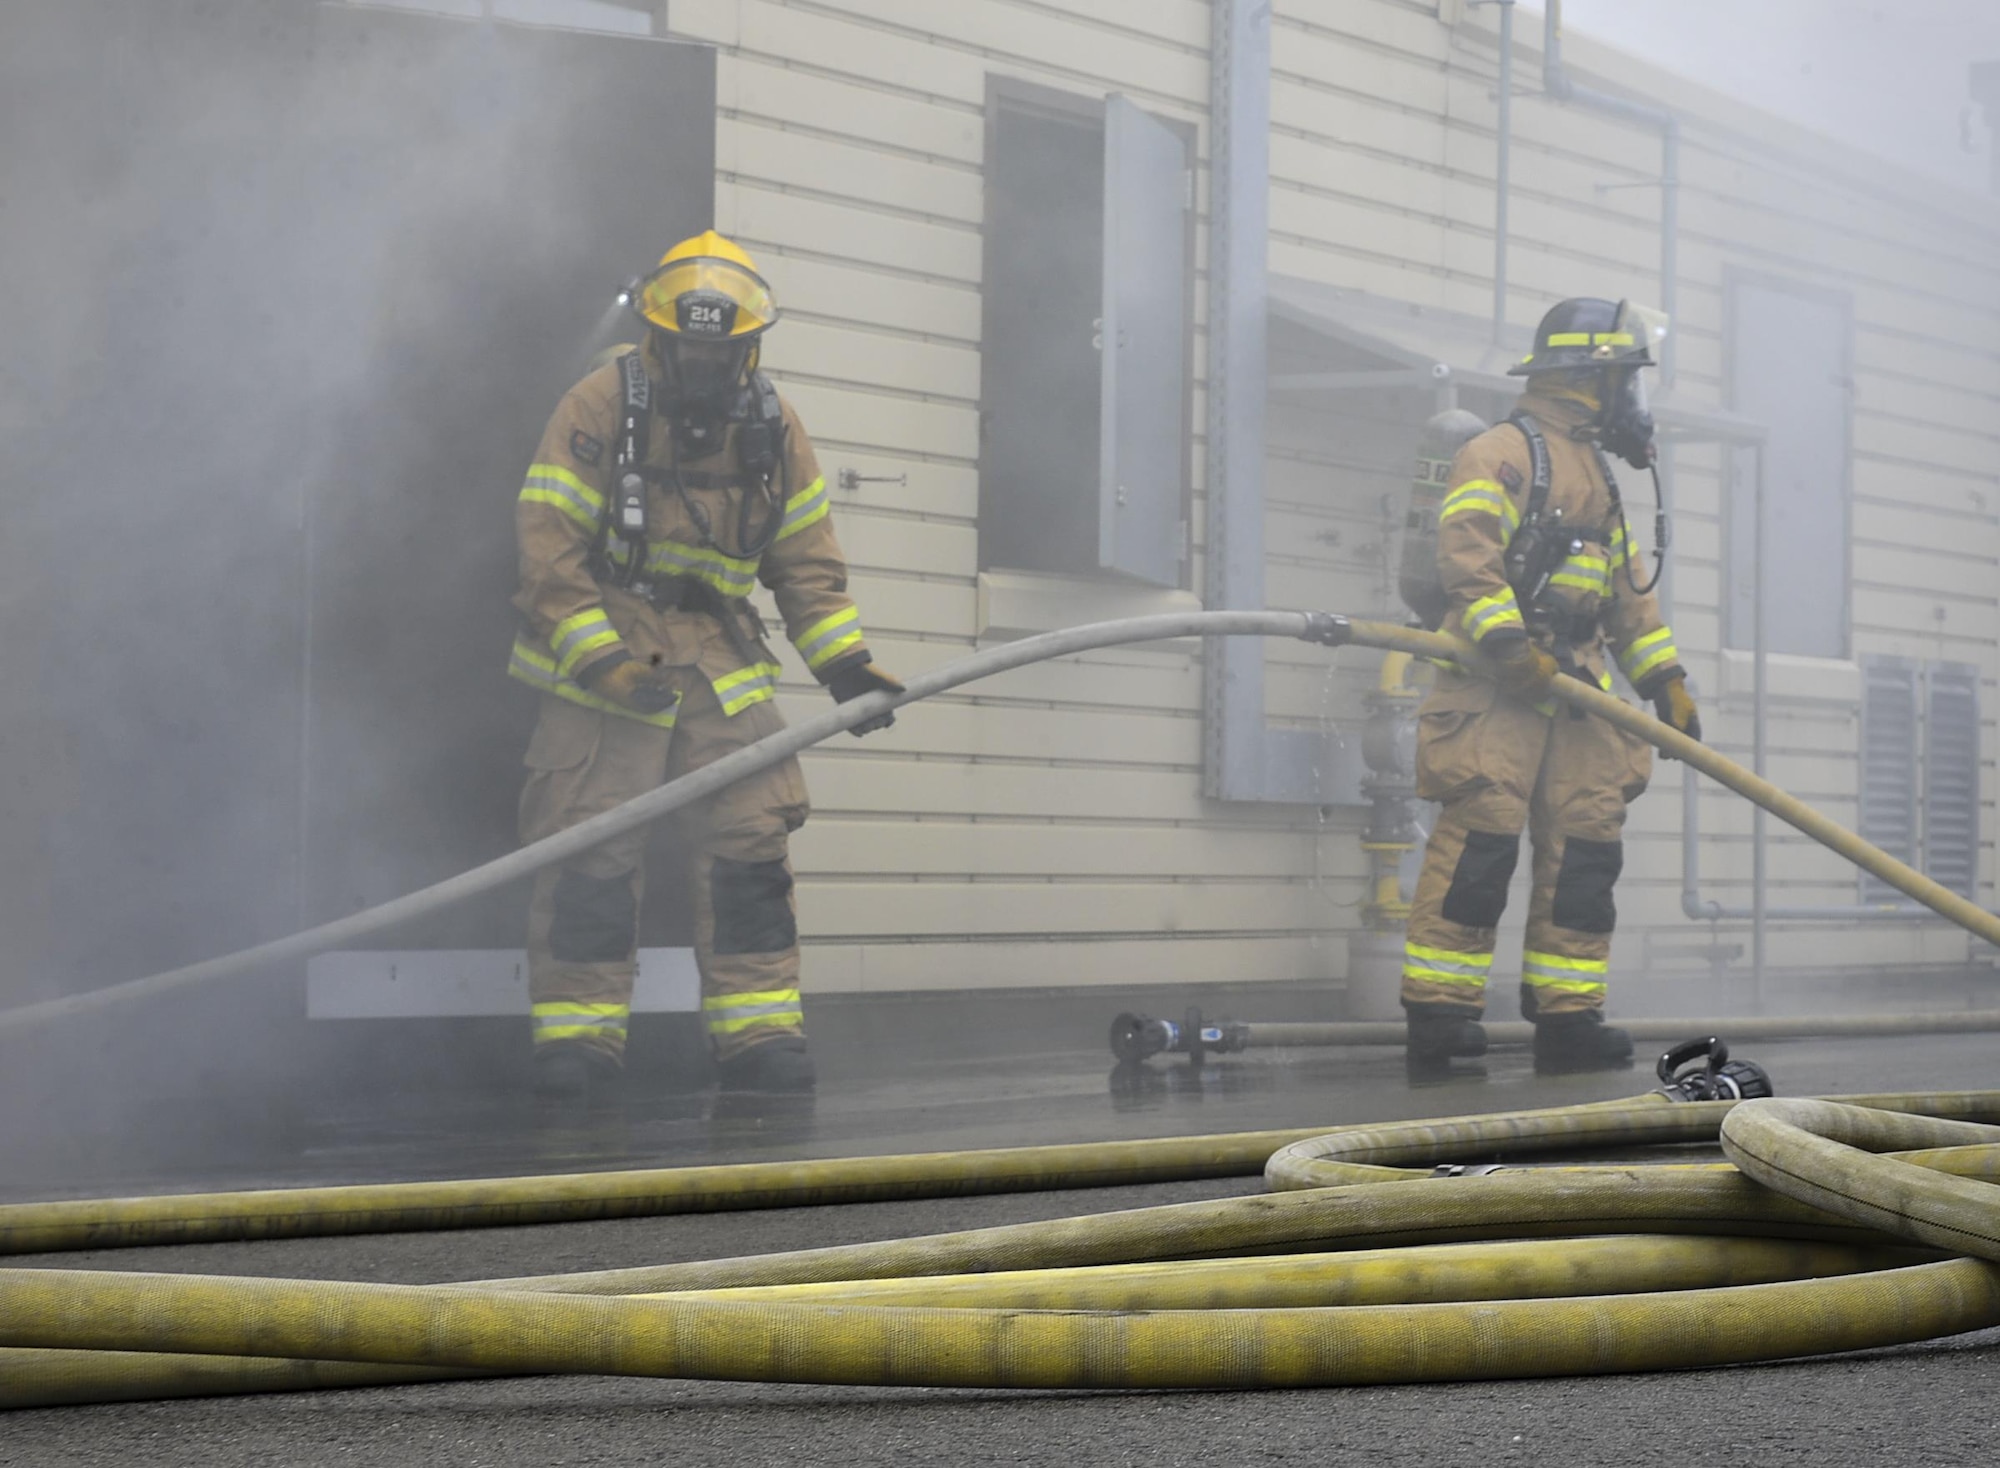 Airmen from the 86th Civil Engineer Squadron guide a firehose into a simulated burning house during a biannual training exercise June 2, 2016, at Ramstein Air Base, Germany. The Airmen constantly train for competency in their skillsets as well as expanding their training and knowledge. (U.S. Air Force photo/Senior Airman Larissa Greatwood)